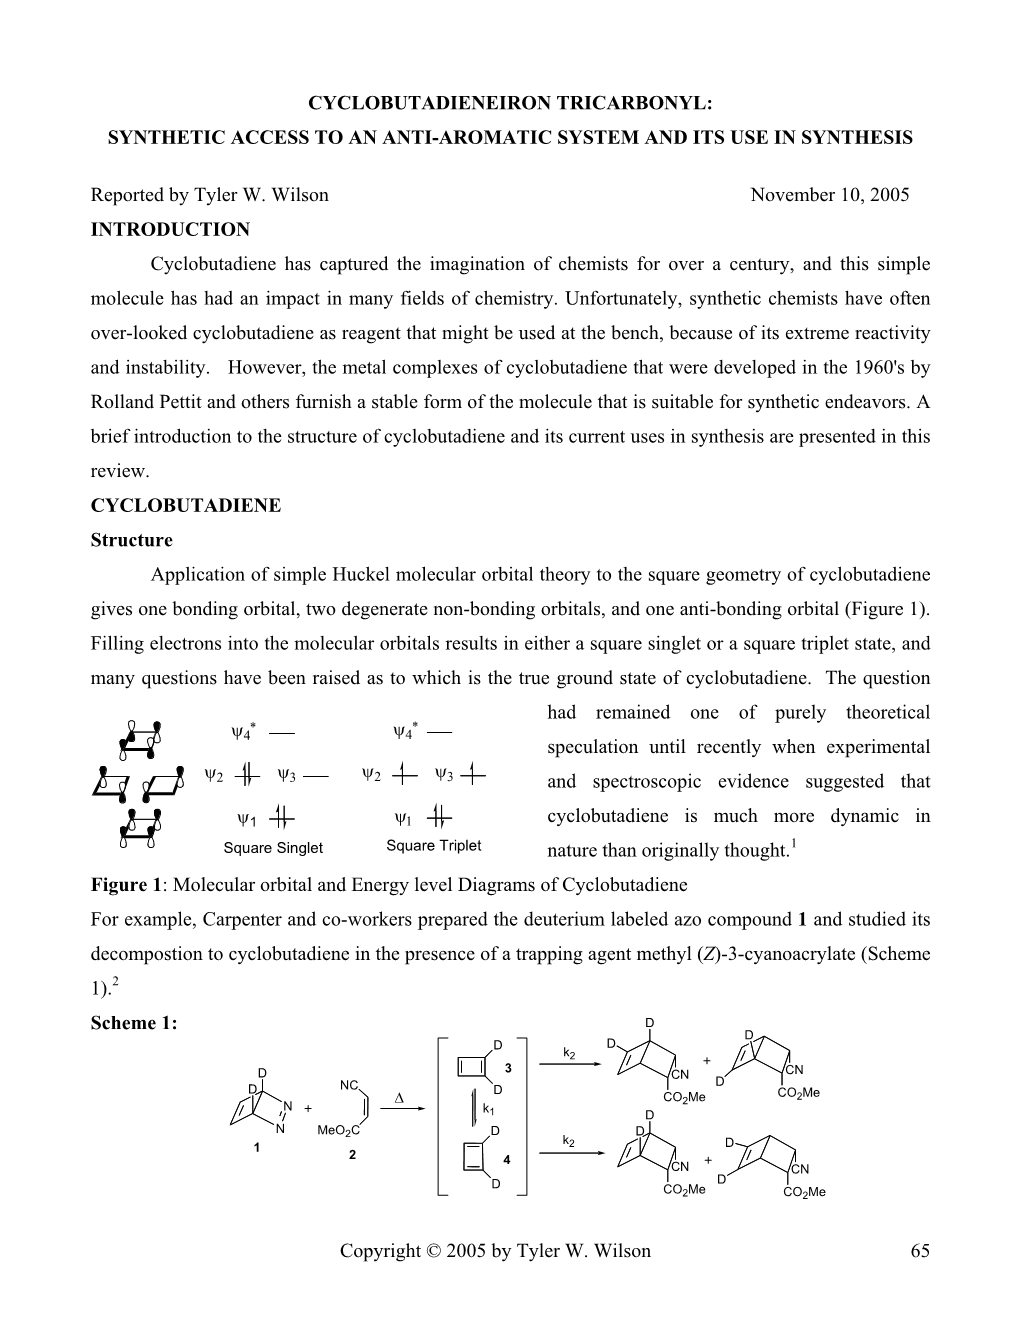 Cyclobutadiene Metal Complexes in Synthesis